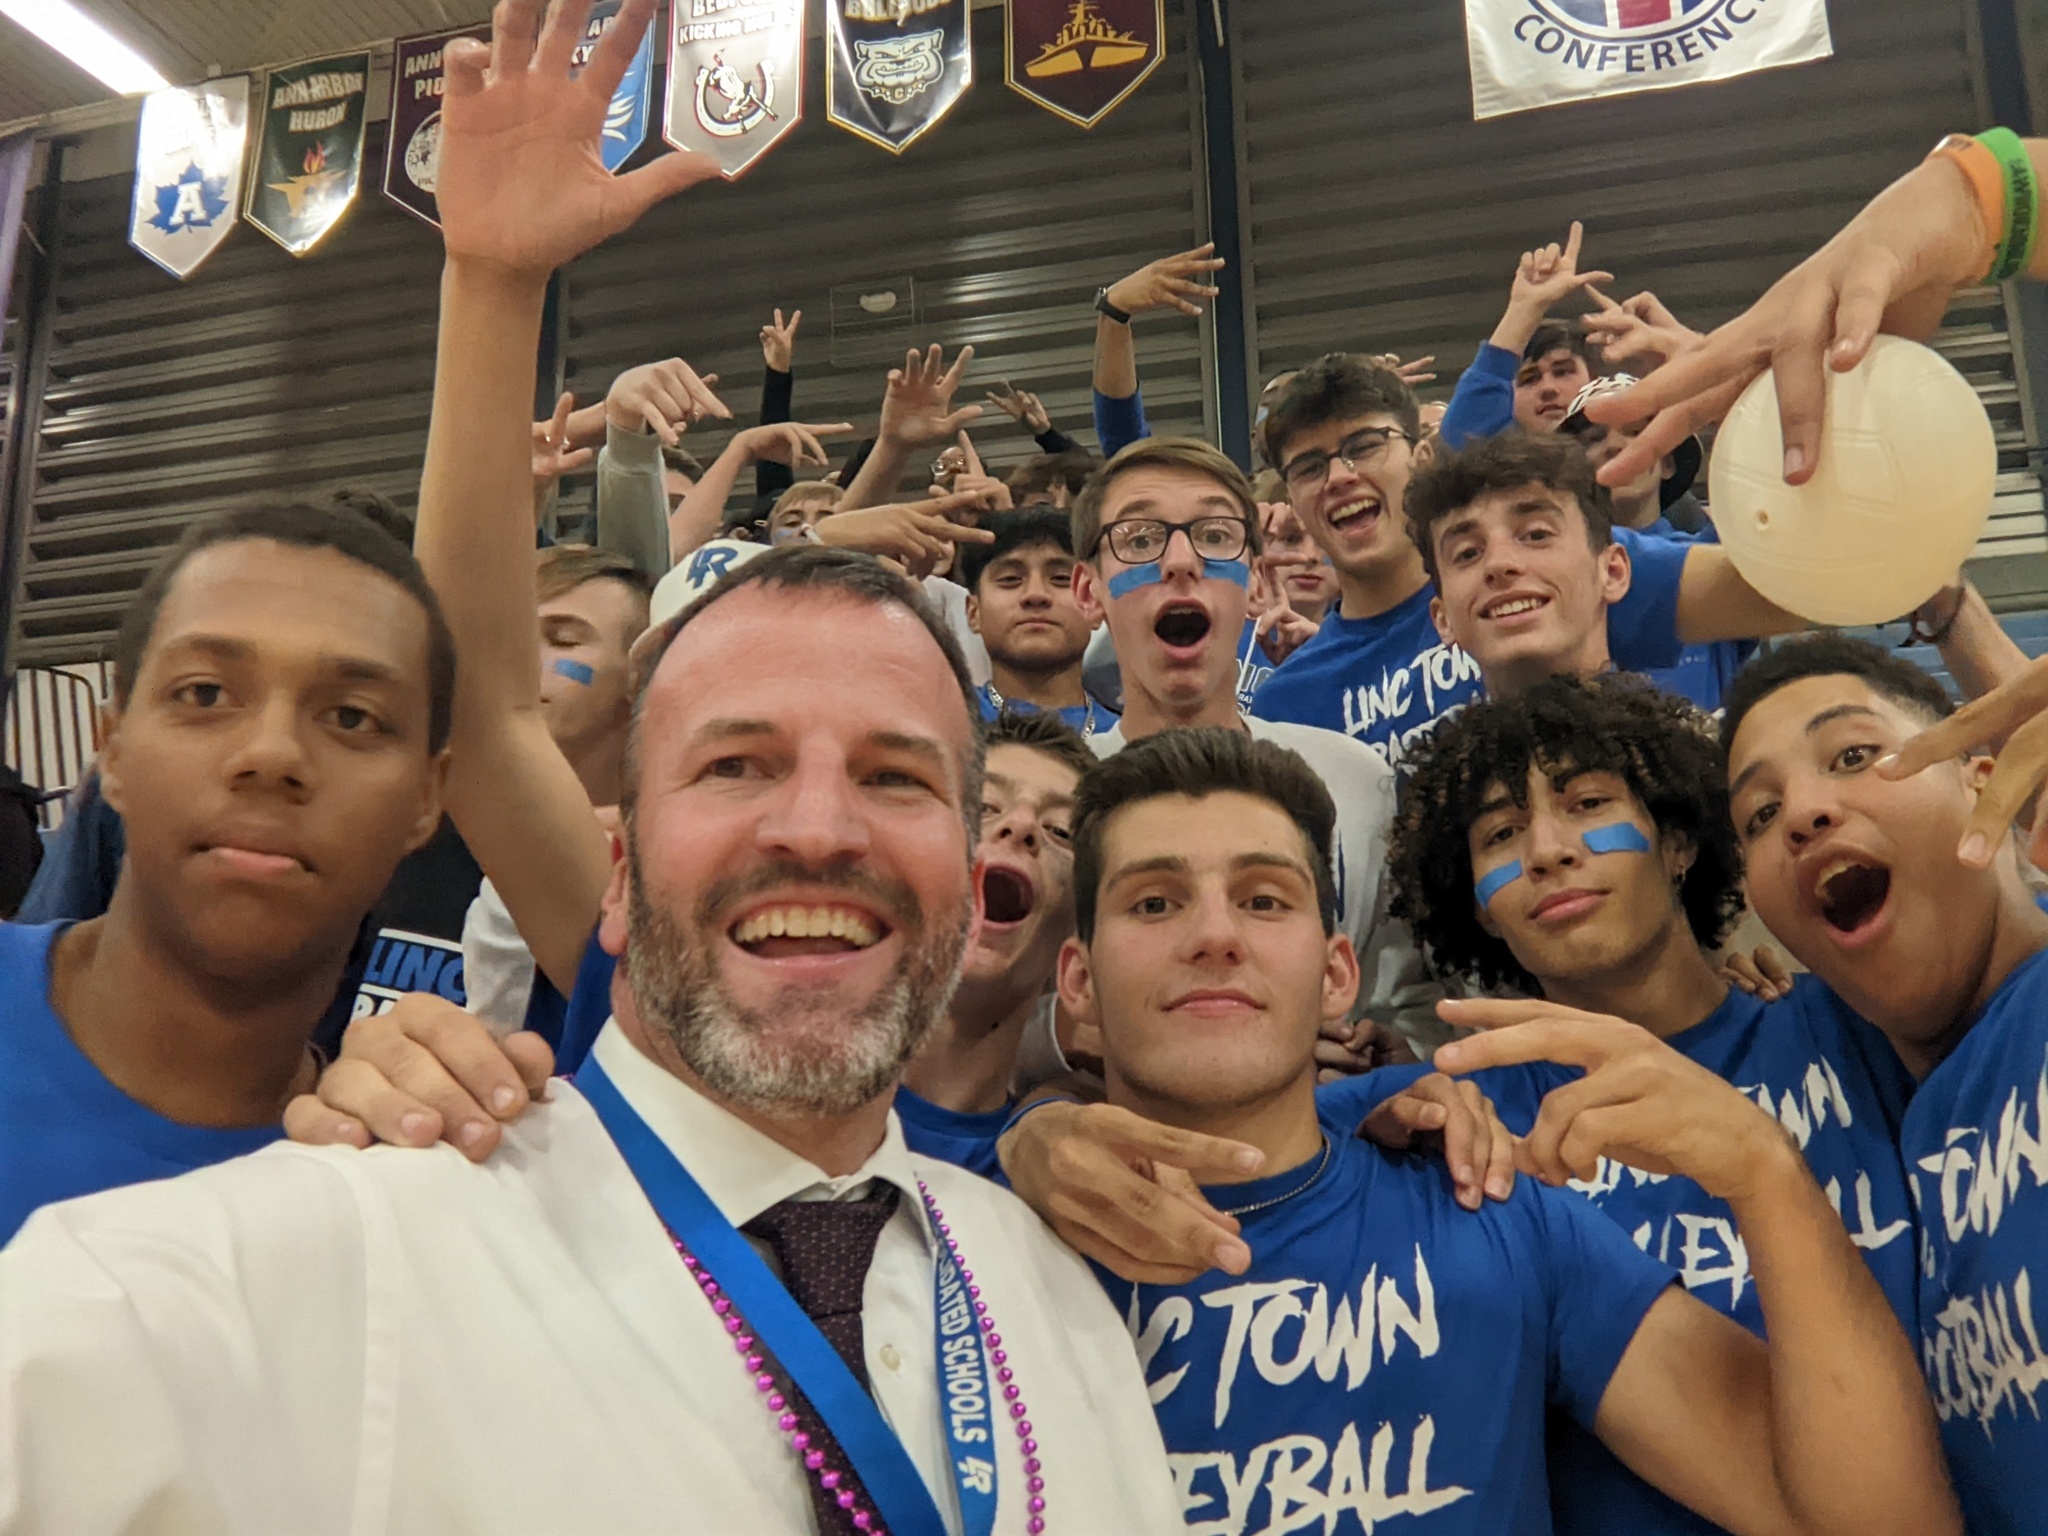 Mr. Jansen with students in the student section